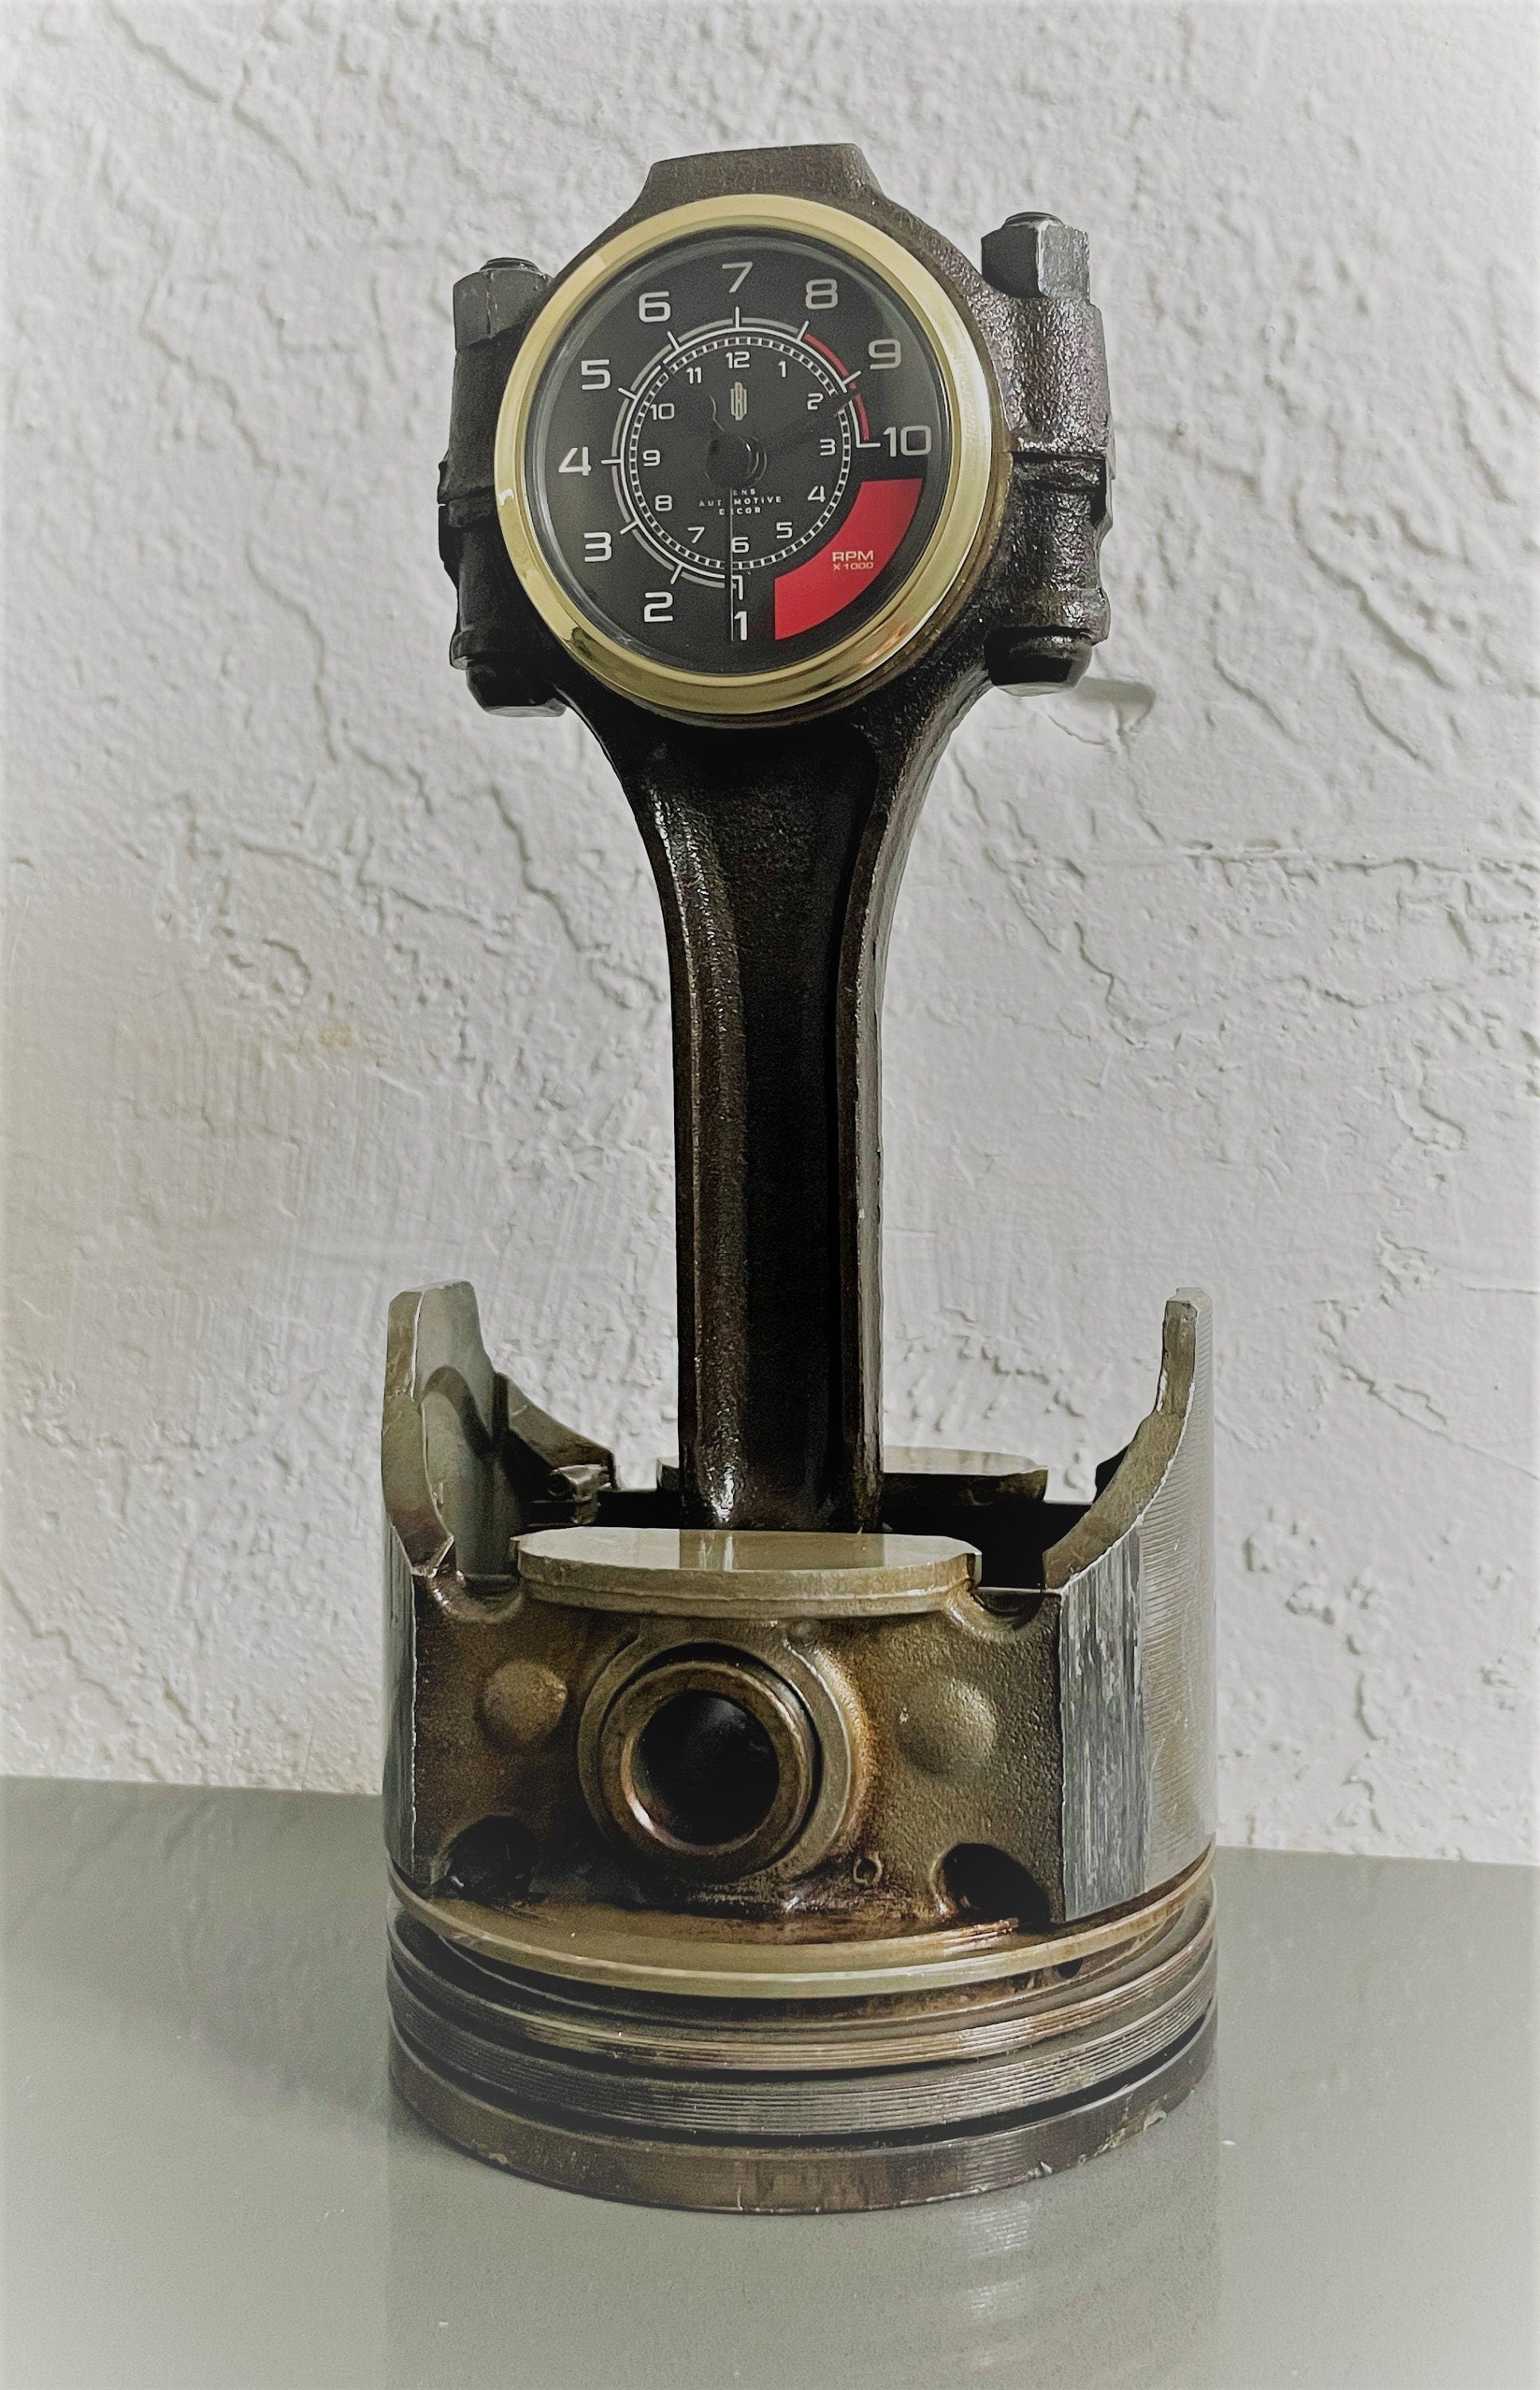 A car piston clock in a patina finish with a gold clock ring and custom black and red RPM clock face.